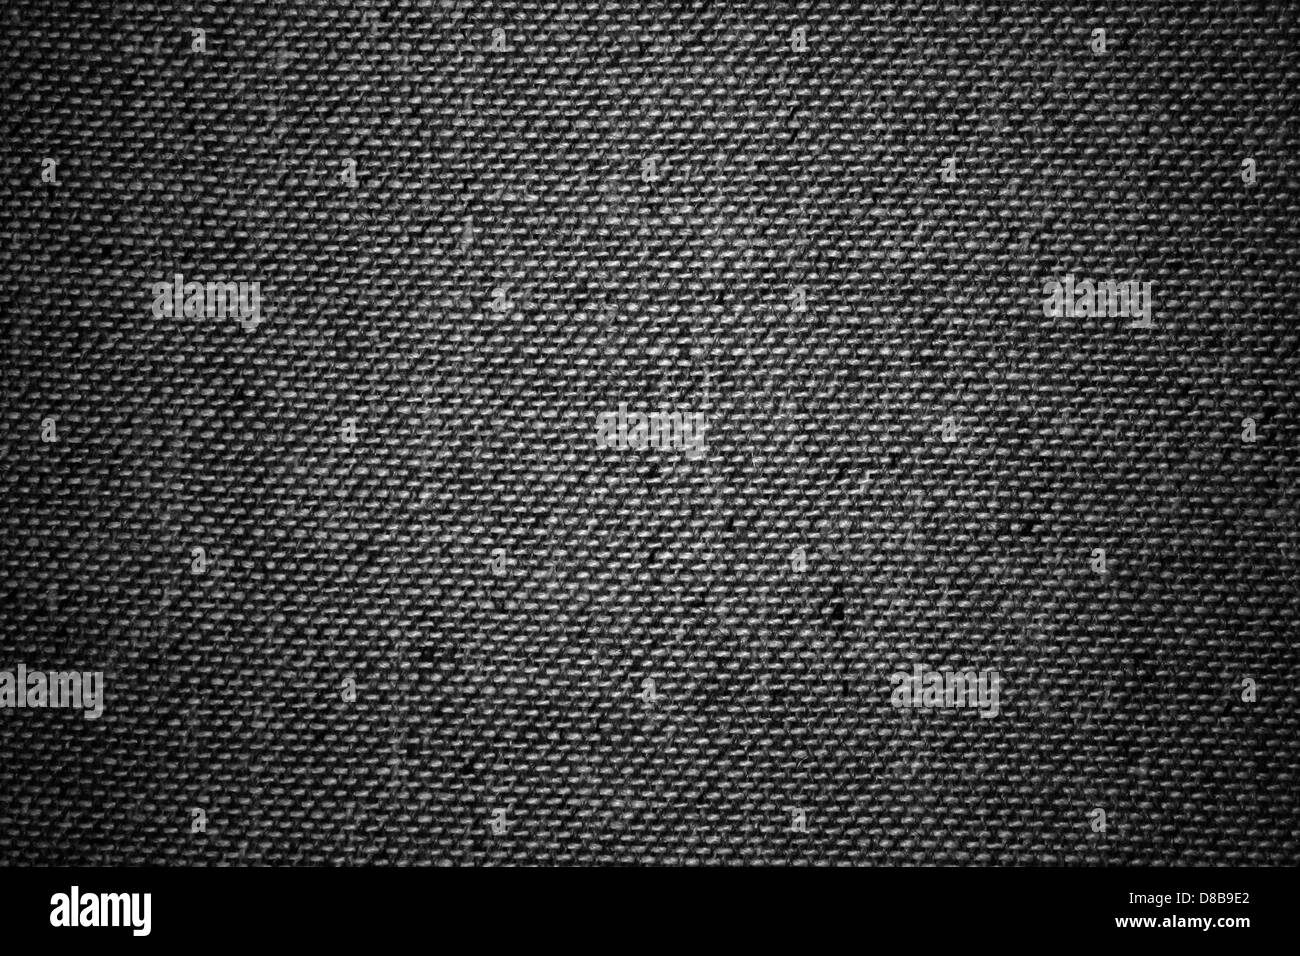 black and white upholstery fabric close up texture Stock Photo - Alamy